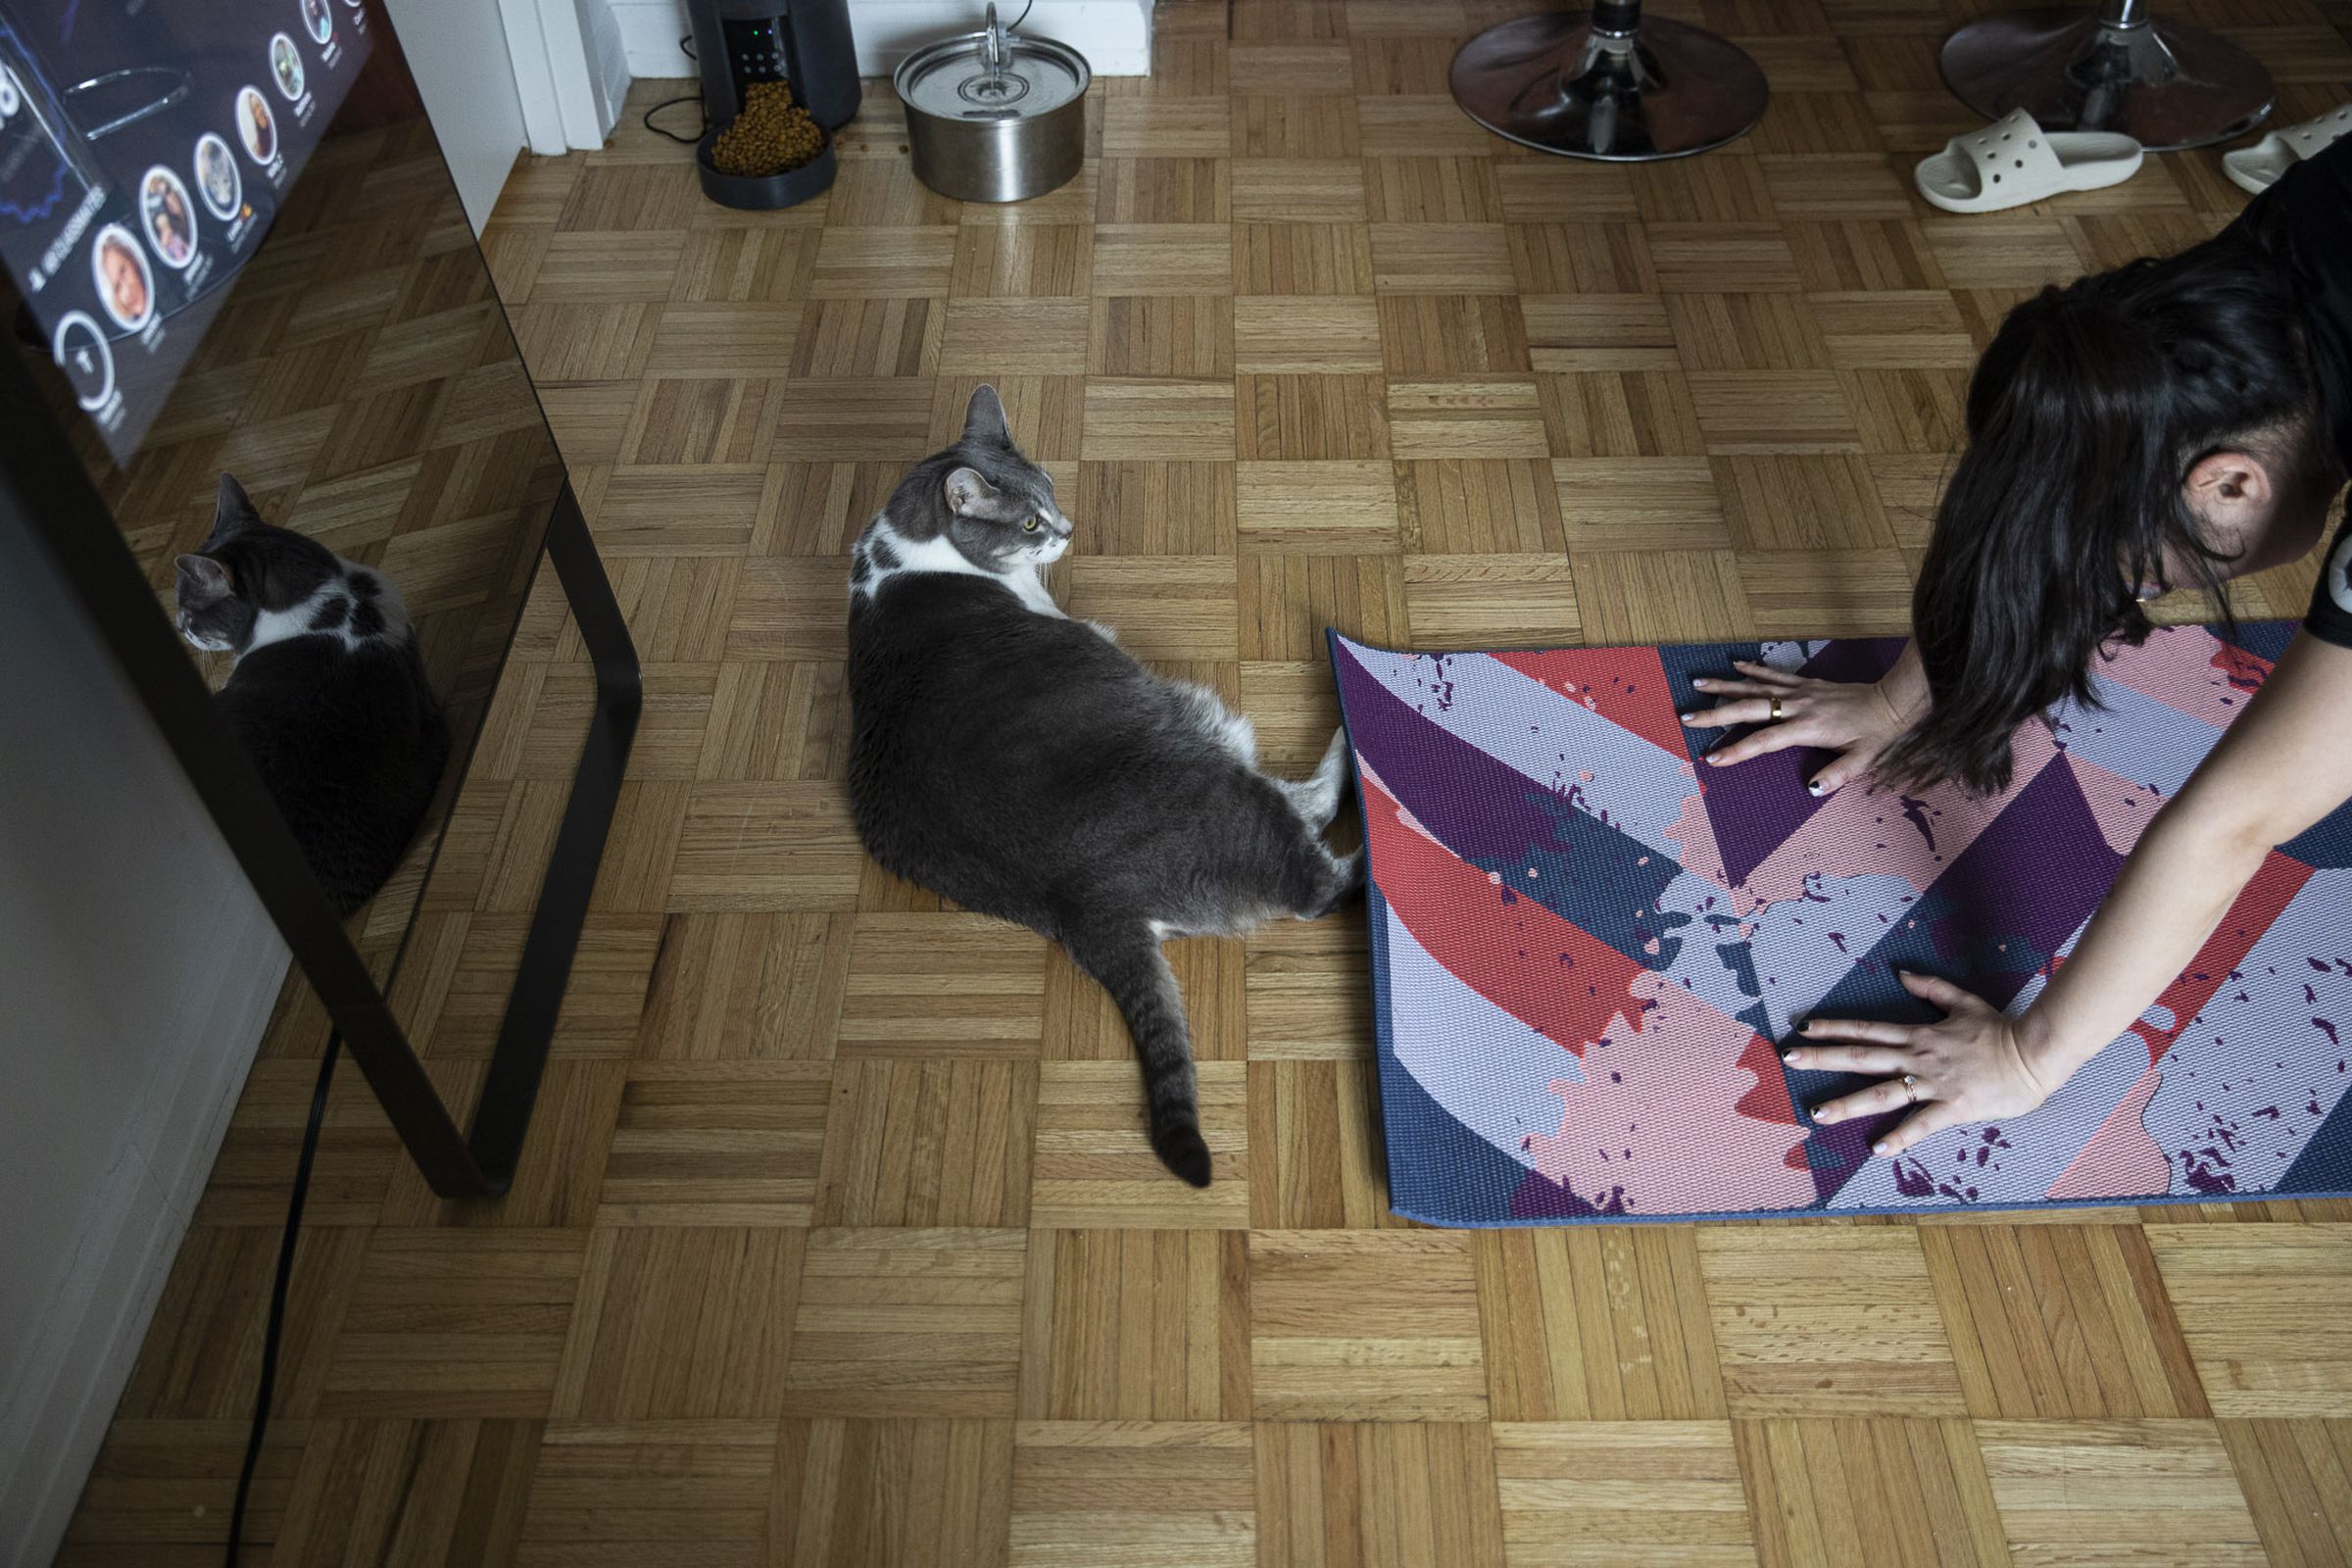 Cat sits on floor in center of photo, watching woman exercising on colorful mat on right.